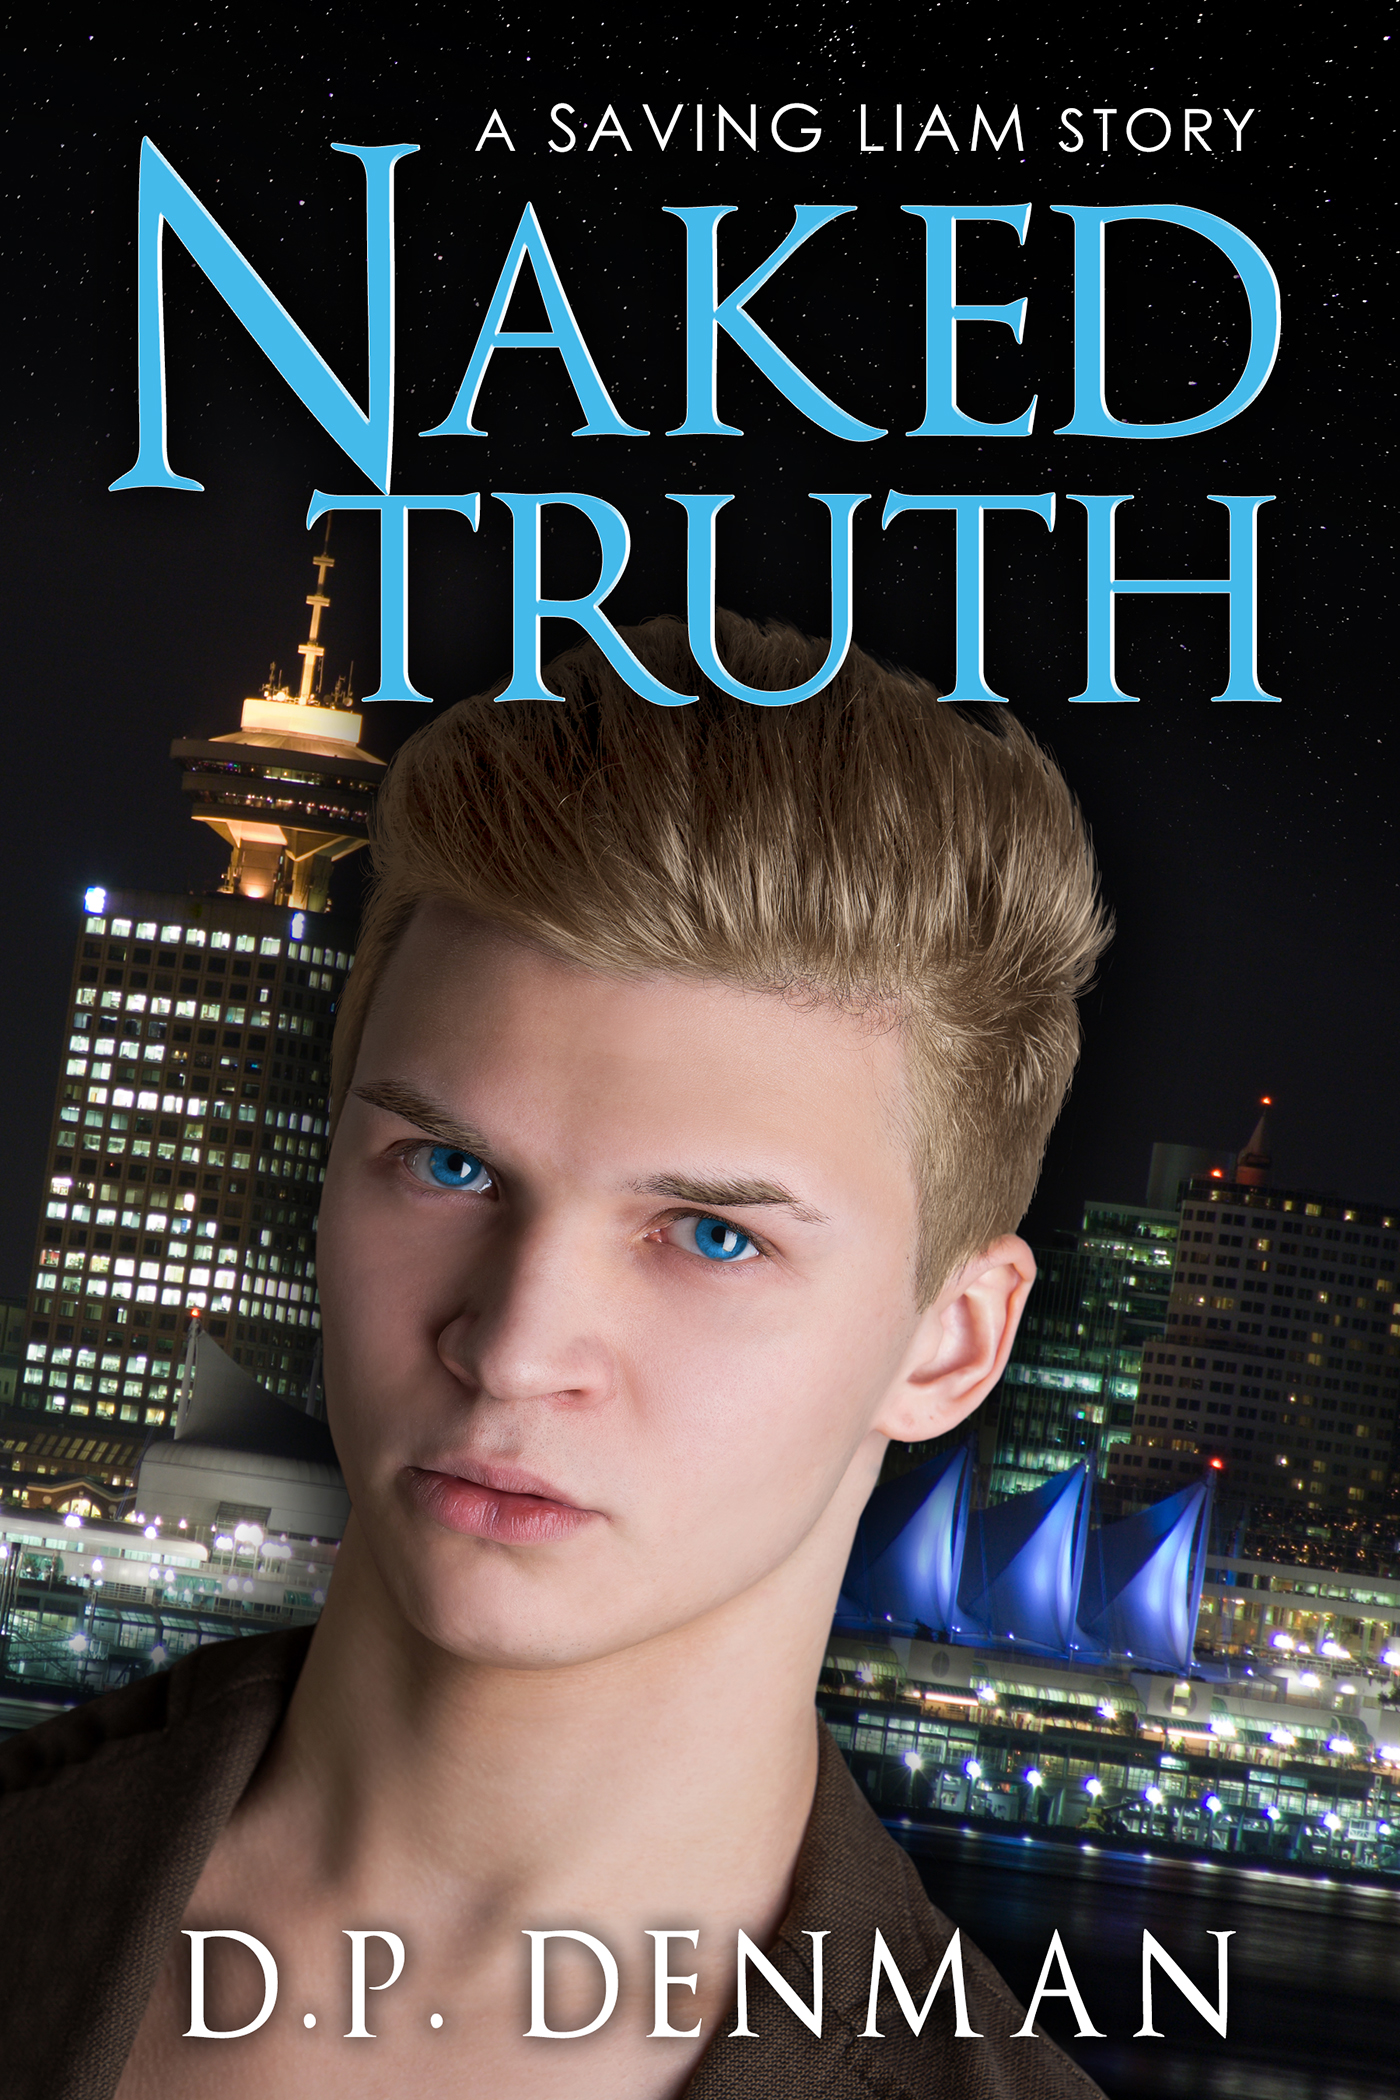 Naked Truth: A Saving Liam Story